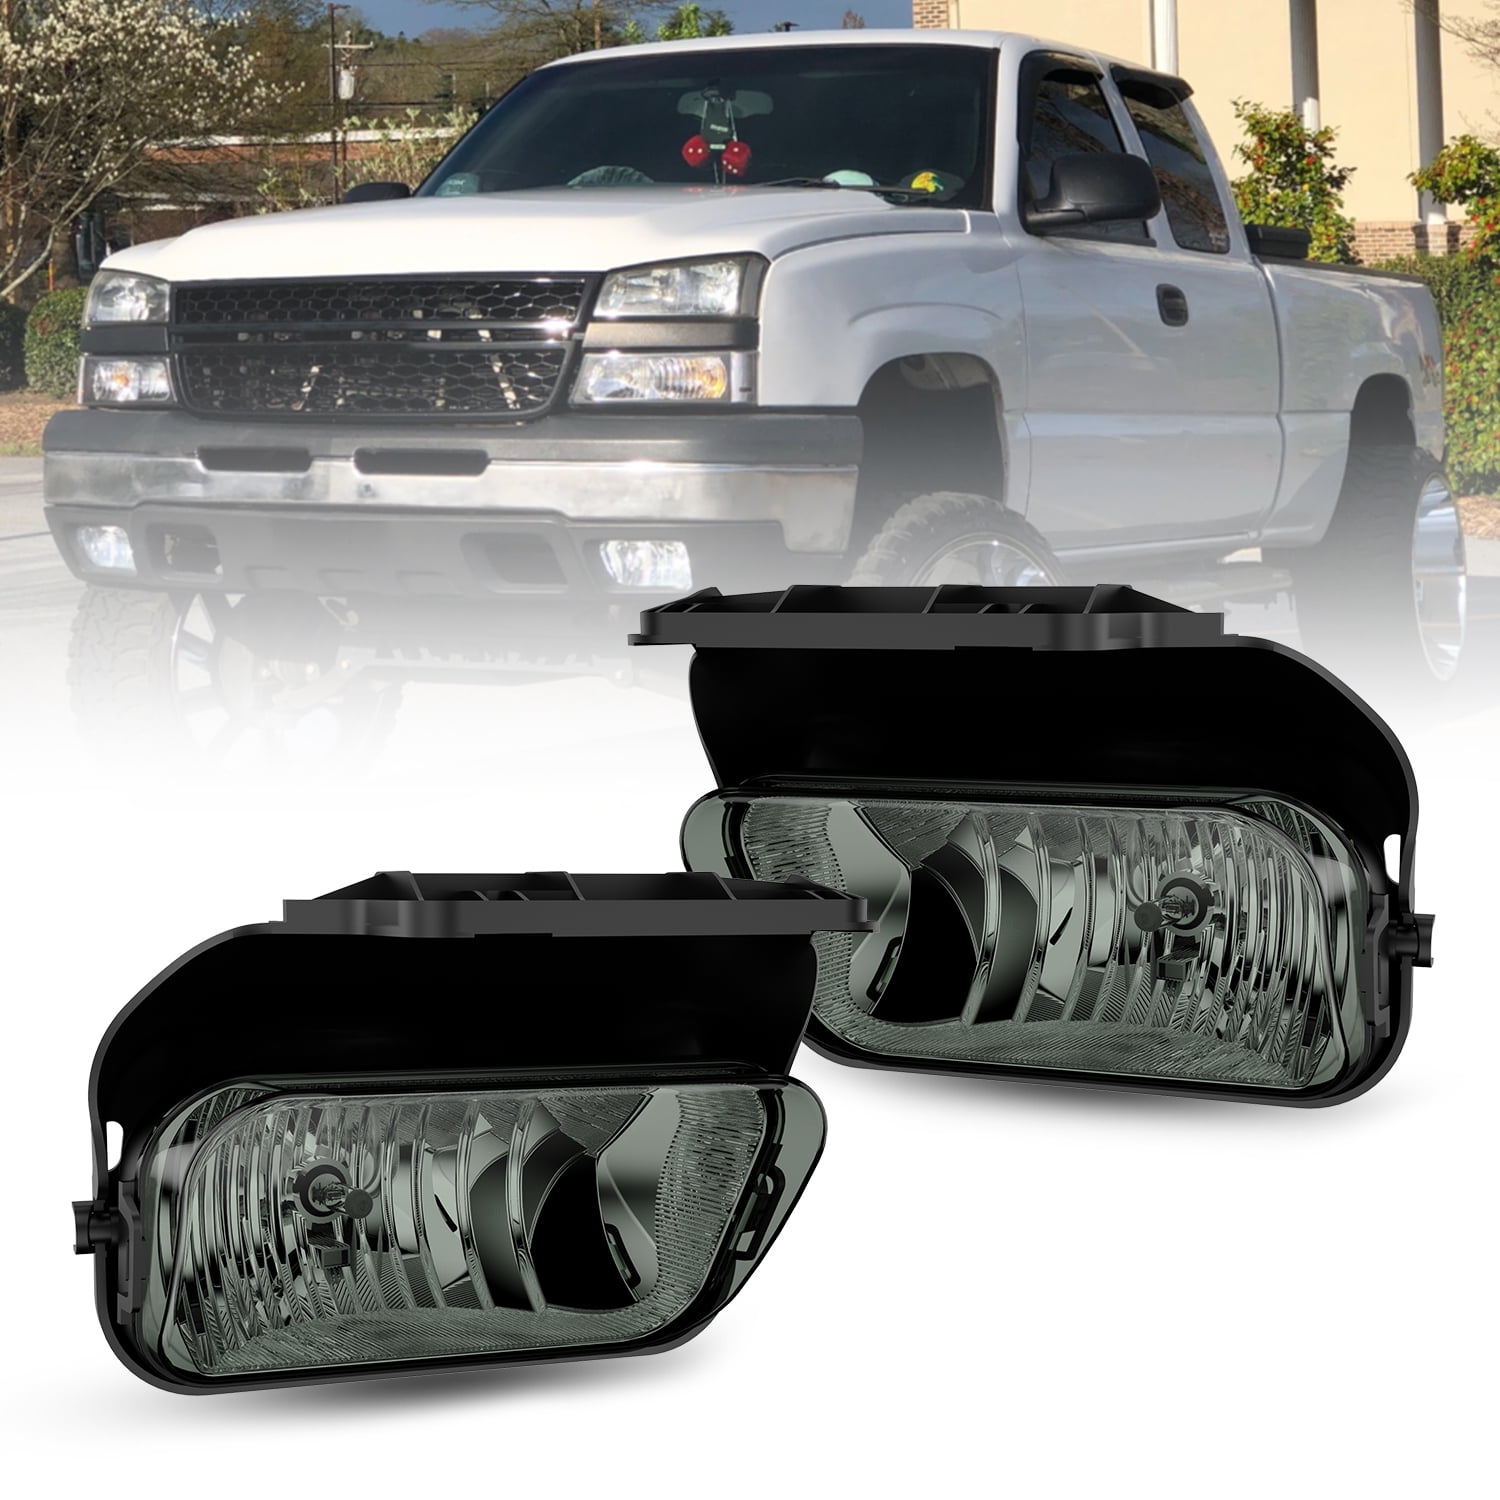 Driving Fog Lights Lamps Replacement for Chevy Silverado 2003 2004 2005 2006 2007 All Models Avalanche 2002-2006 Without Body Cladding H10 12V 42W Halogen Bulbs Clear Lens 